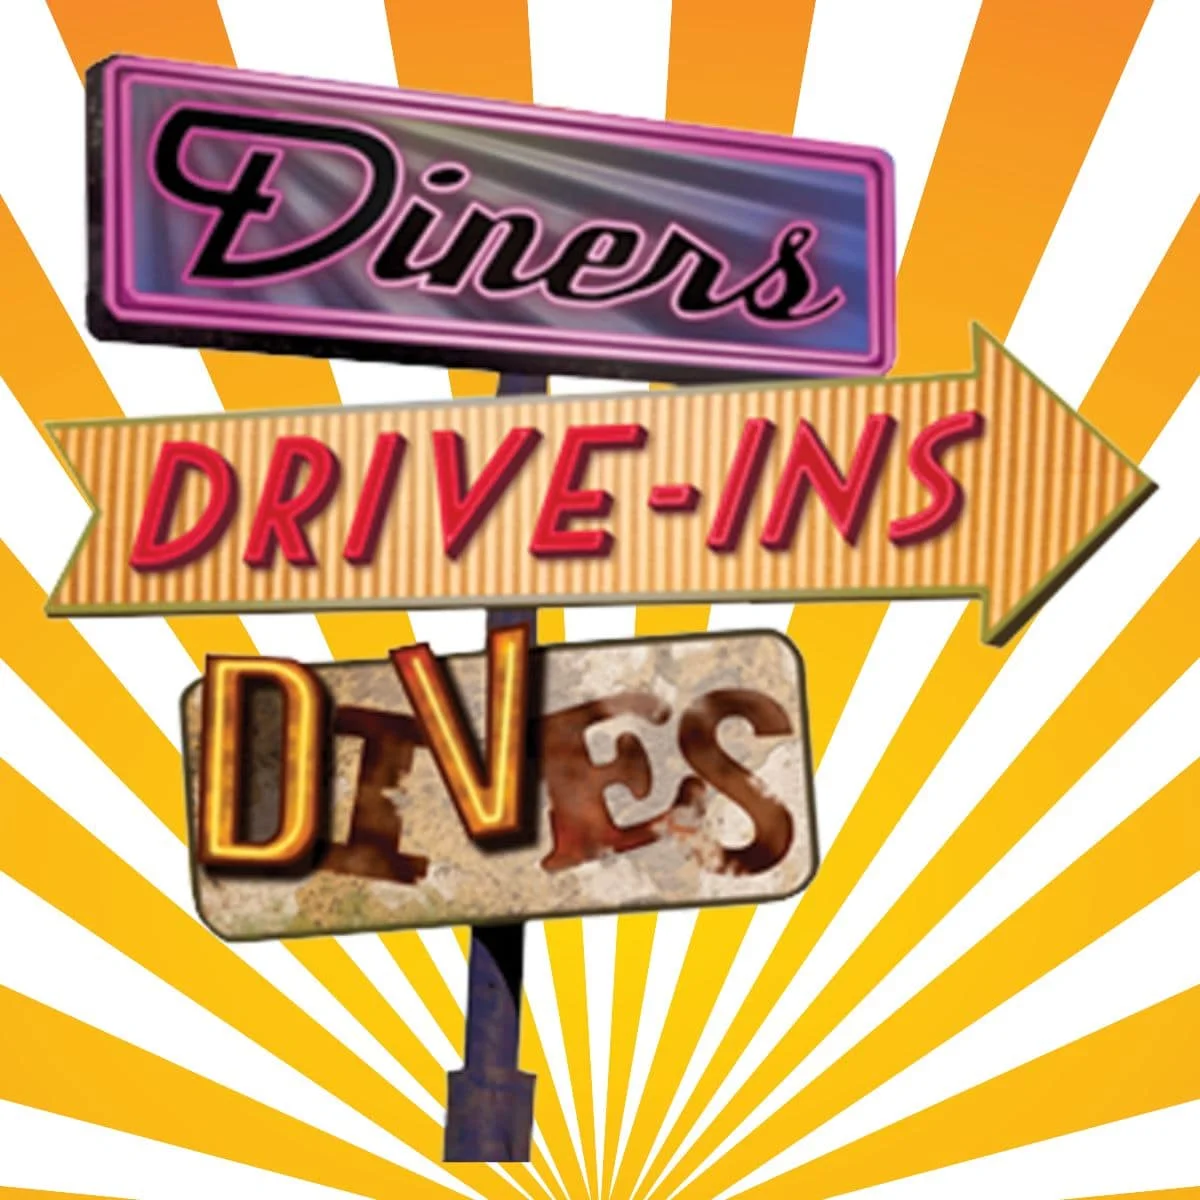 Restaurants Guy Fieri Has Visited On Diners, Drive-Ins & Dives